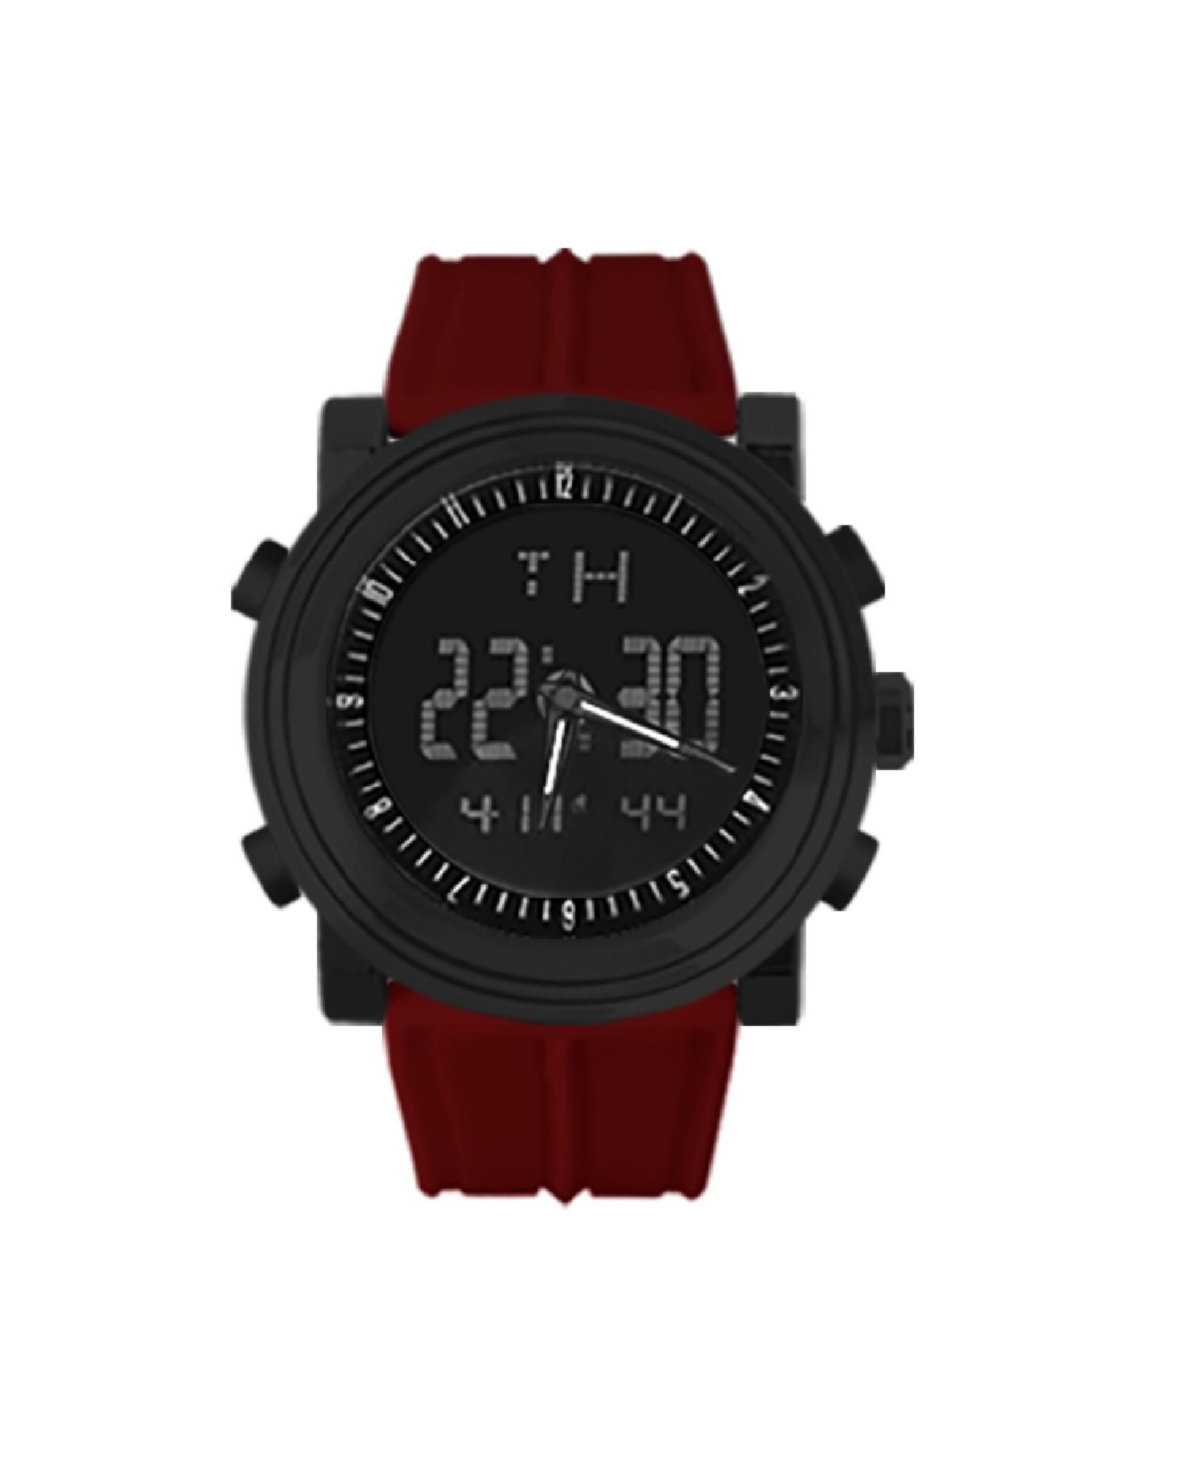 Men's Black, Red Silicone Strap Watch 47mm - Black, Red